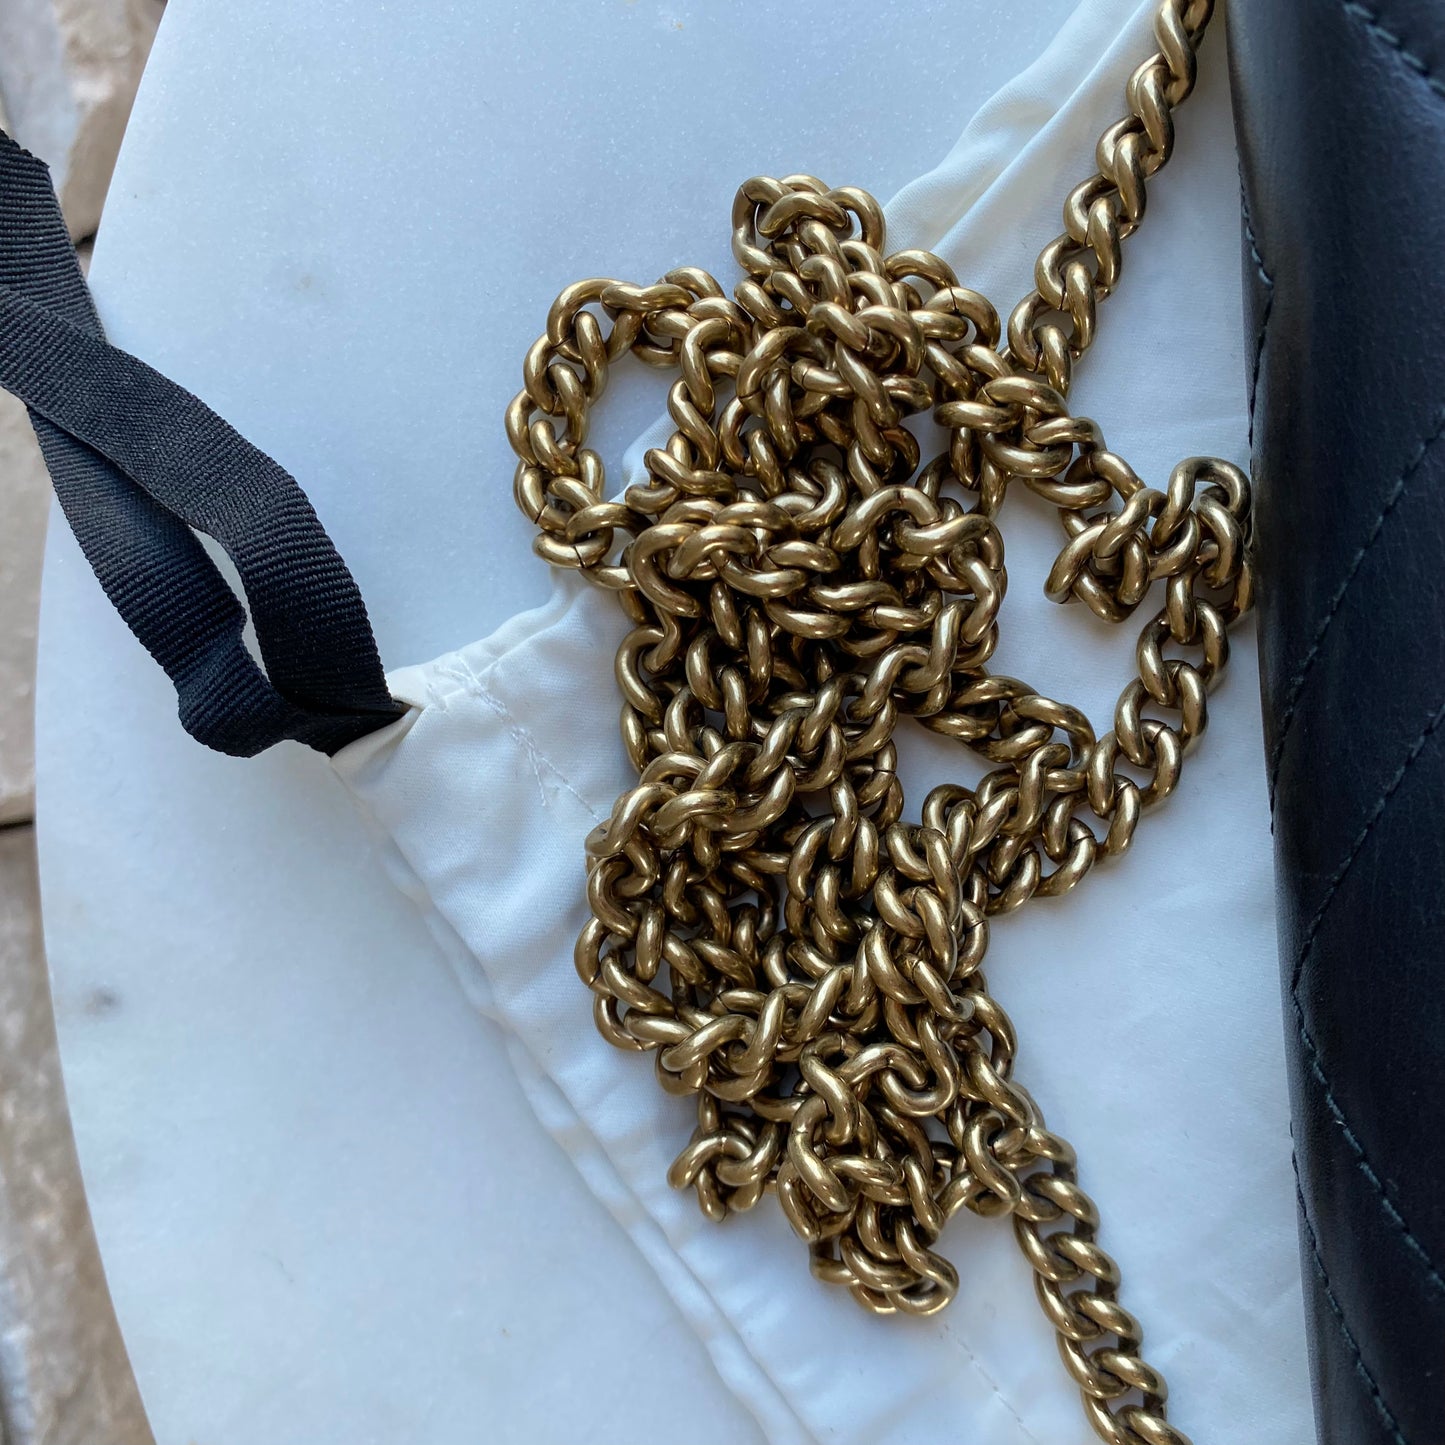 Gucci GG Marmont Matelasse Wallet on Chain